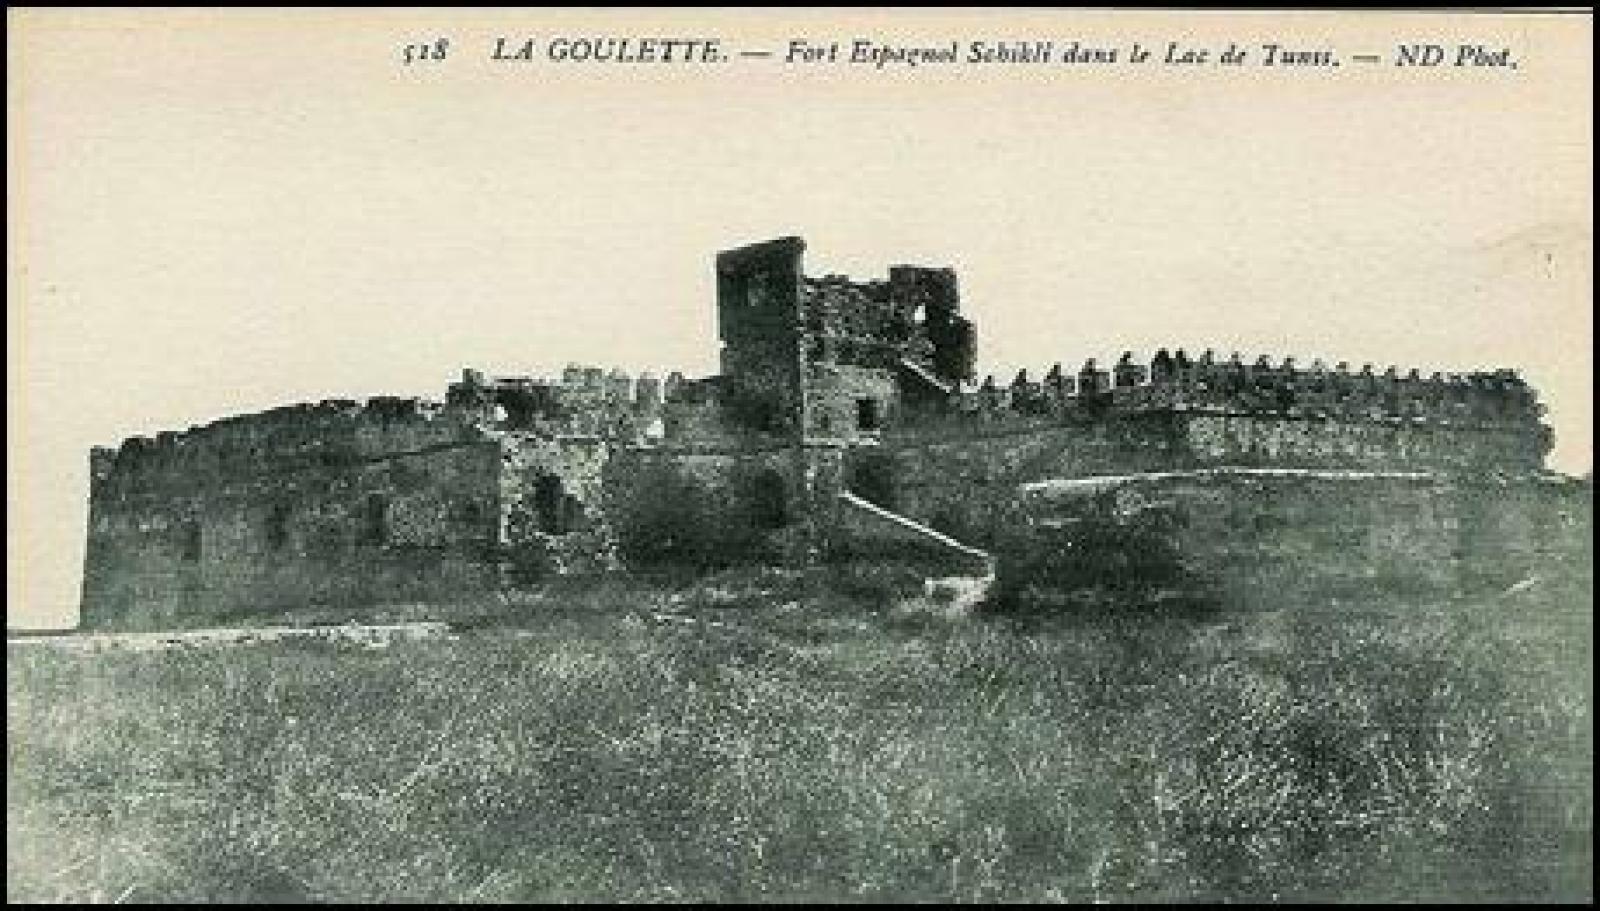 Chikly Tower at Chikly Island in the middle of Lake of Tunis, 1900